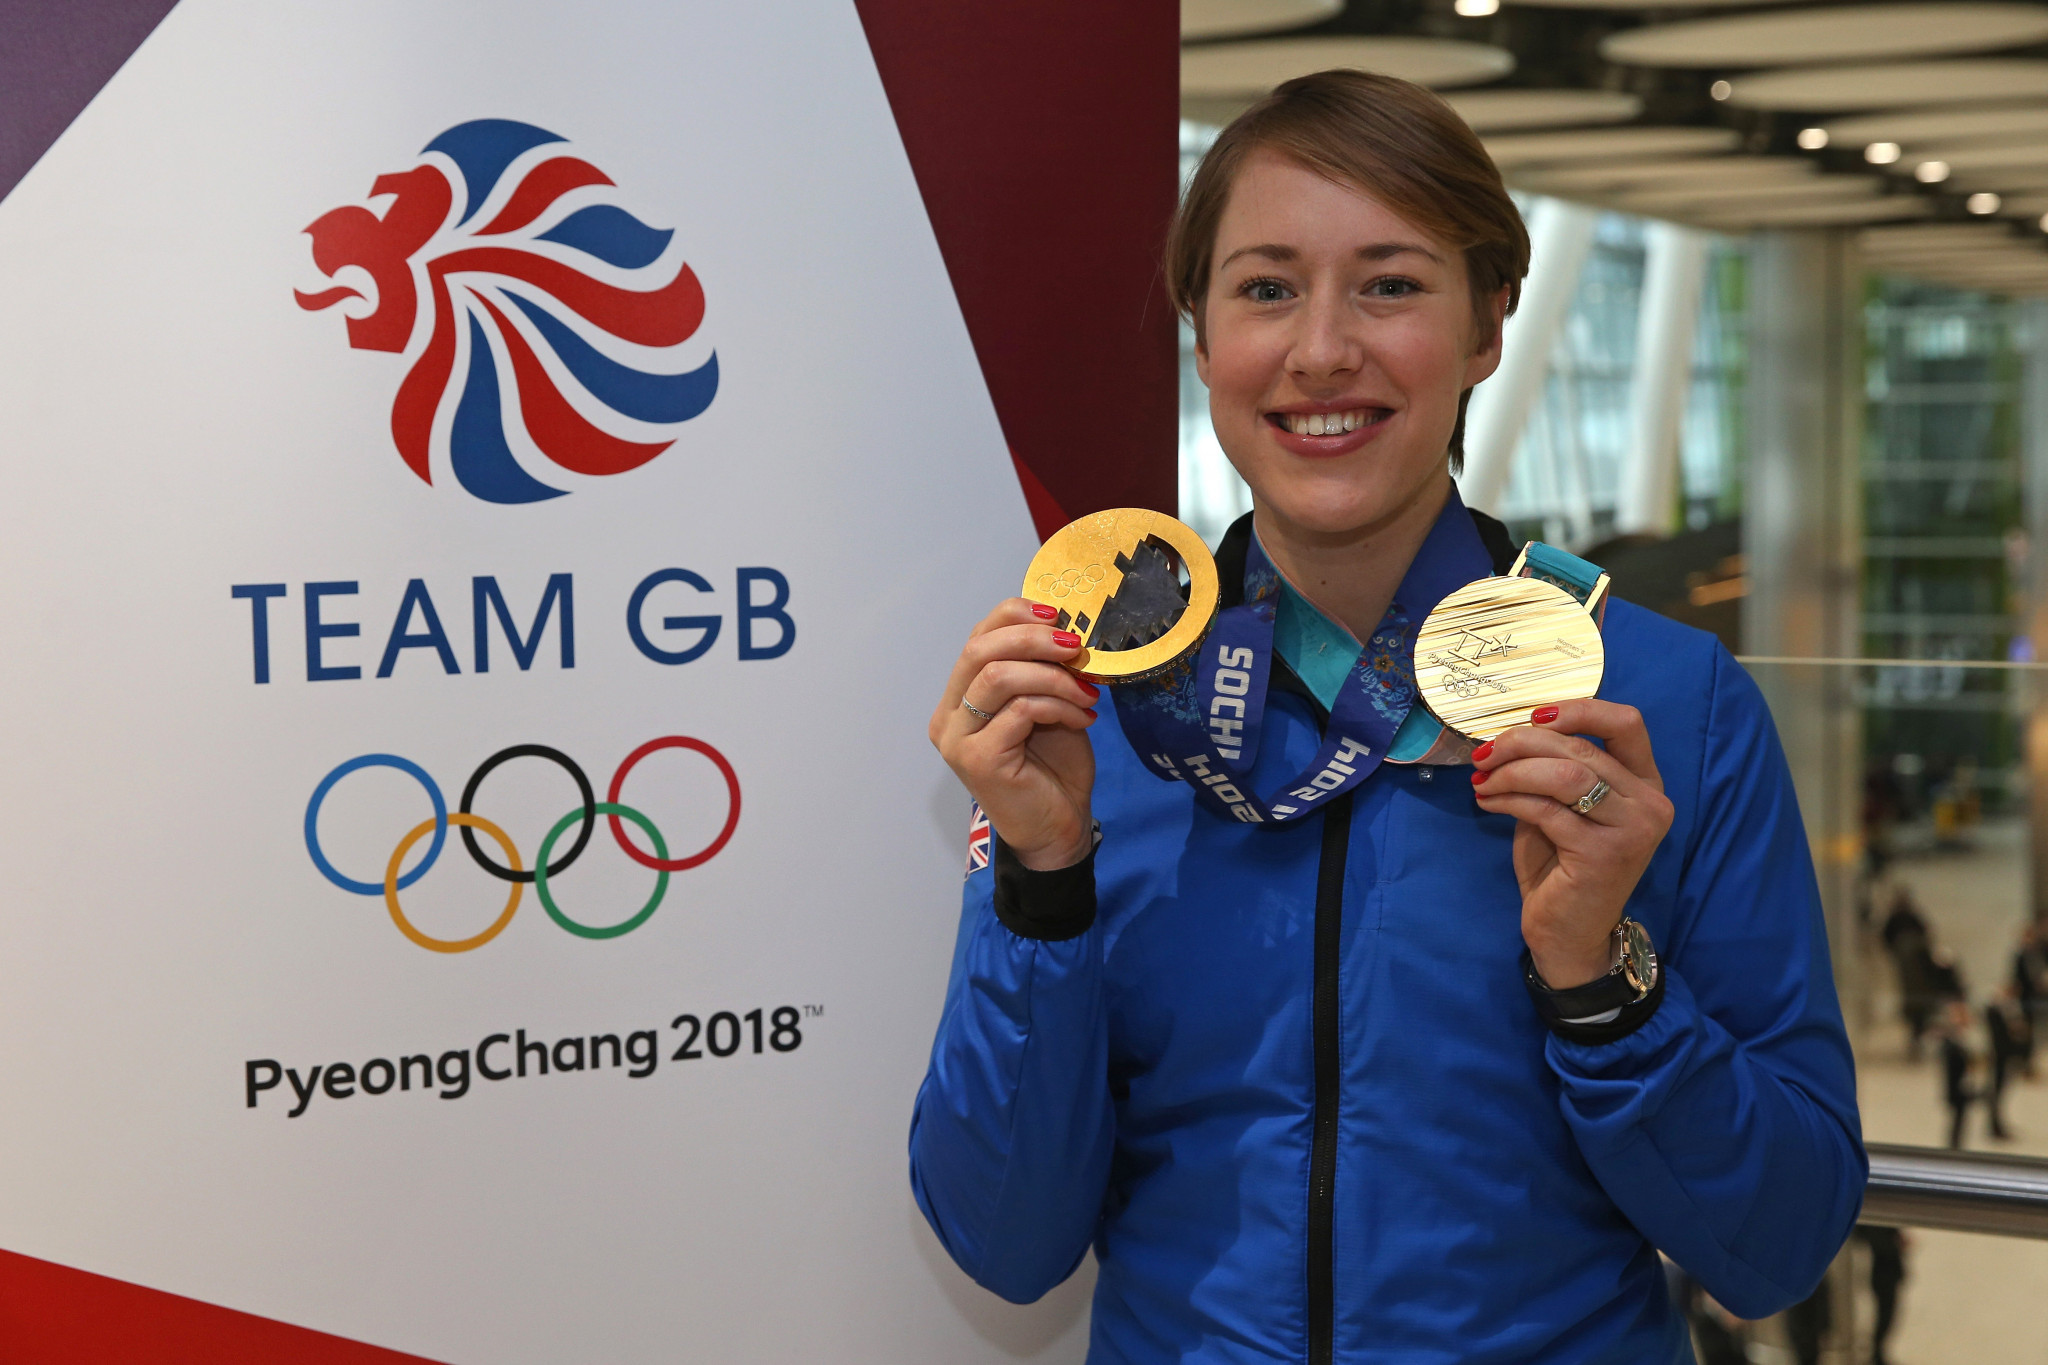 Double Olympic skeleton champion Lizzy Yarnold has announced her retirement from the sport ©Getty Images